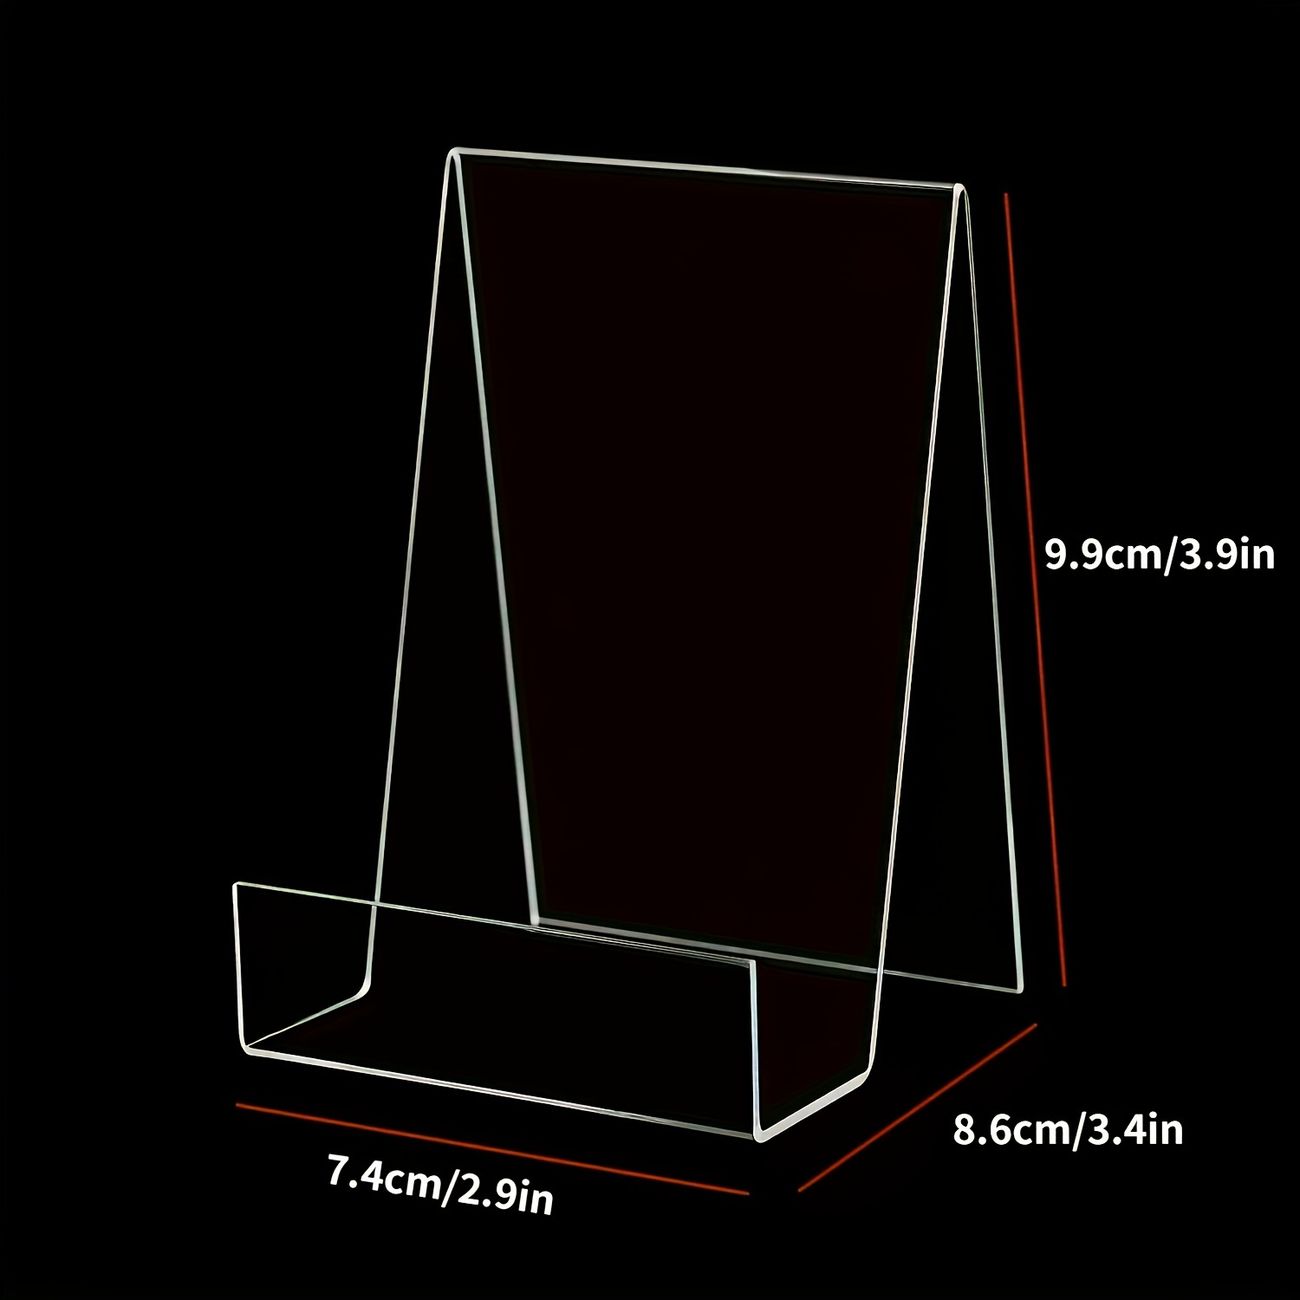 10PCS 4 x 3 Acrylic Book Display Stand Clear Easel with Ledge Tablet Holder  for Displaying Books, …See more 10PCS 4 x 3 Acrylic Book Display Stand